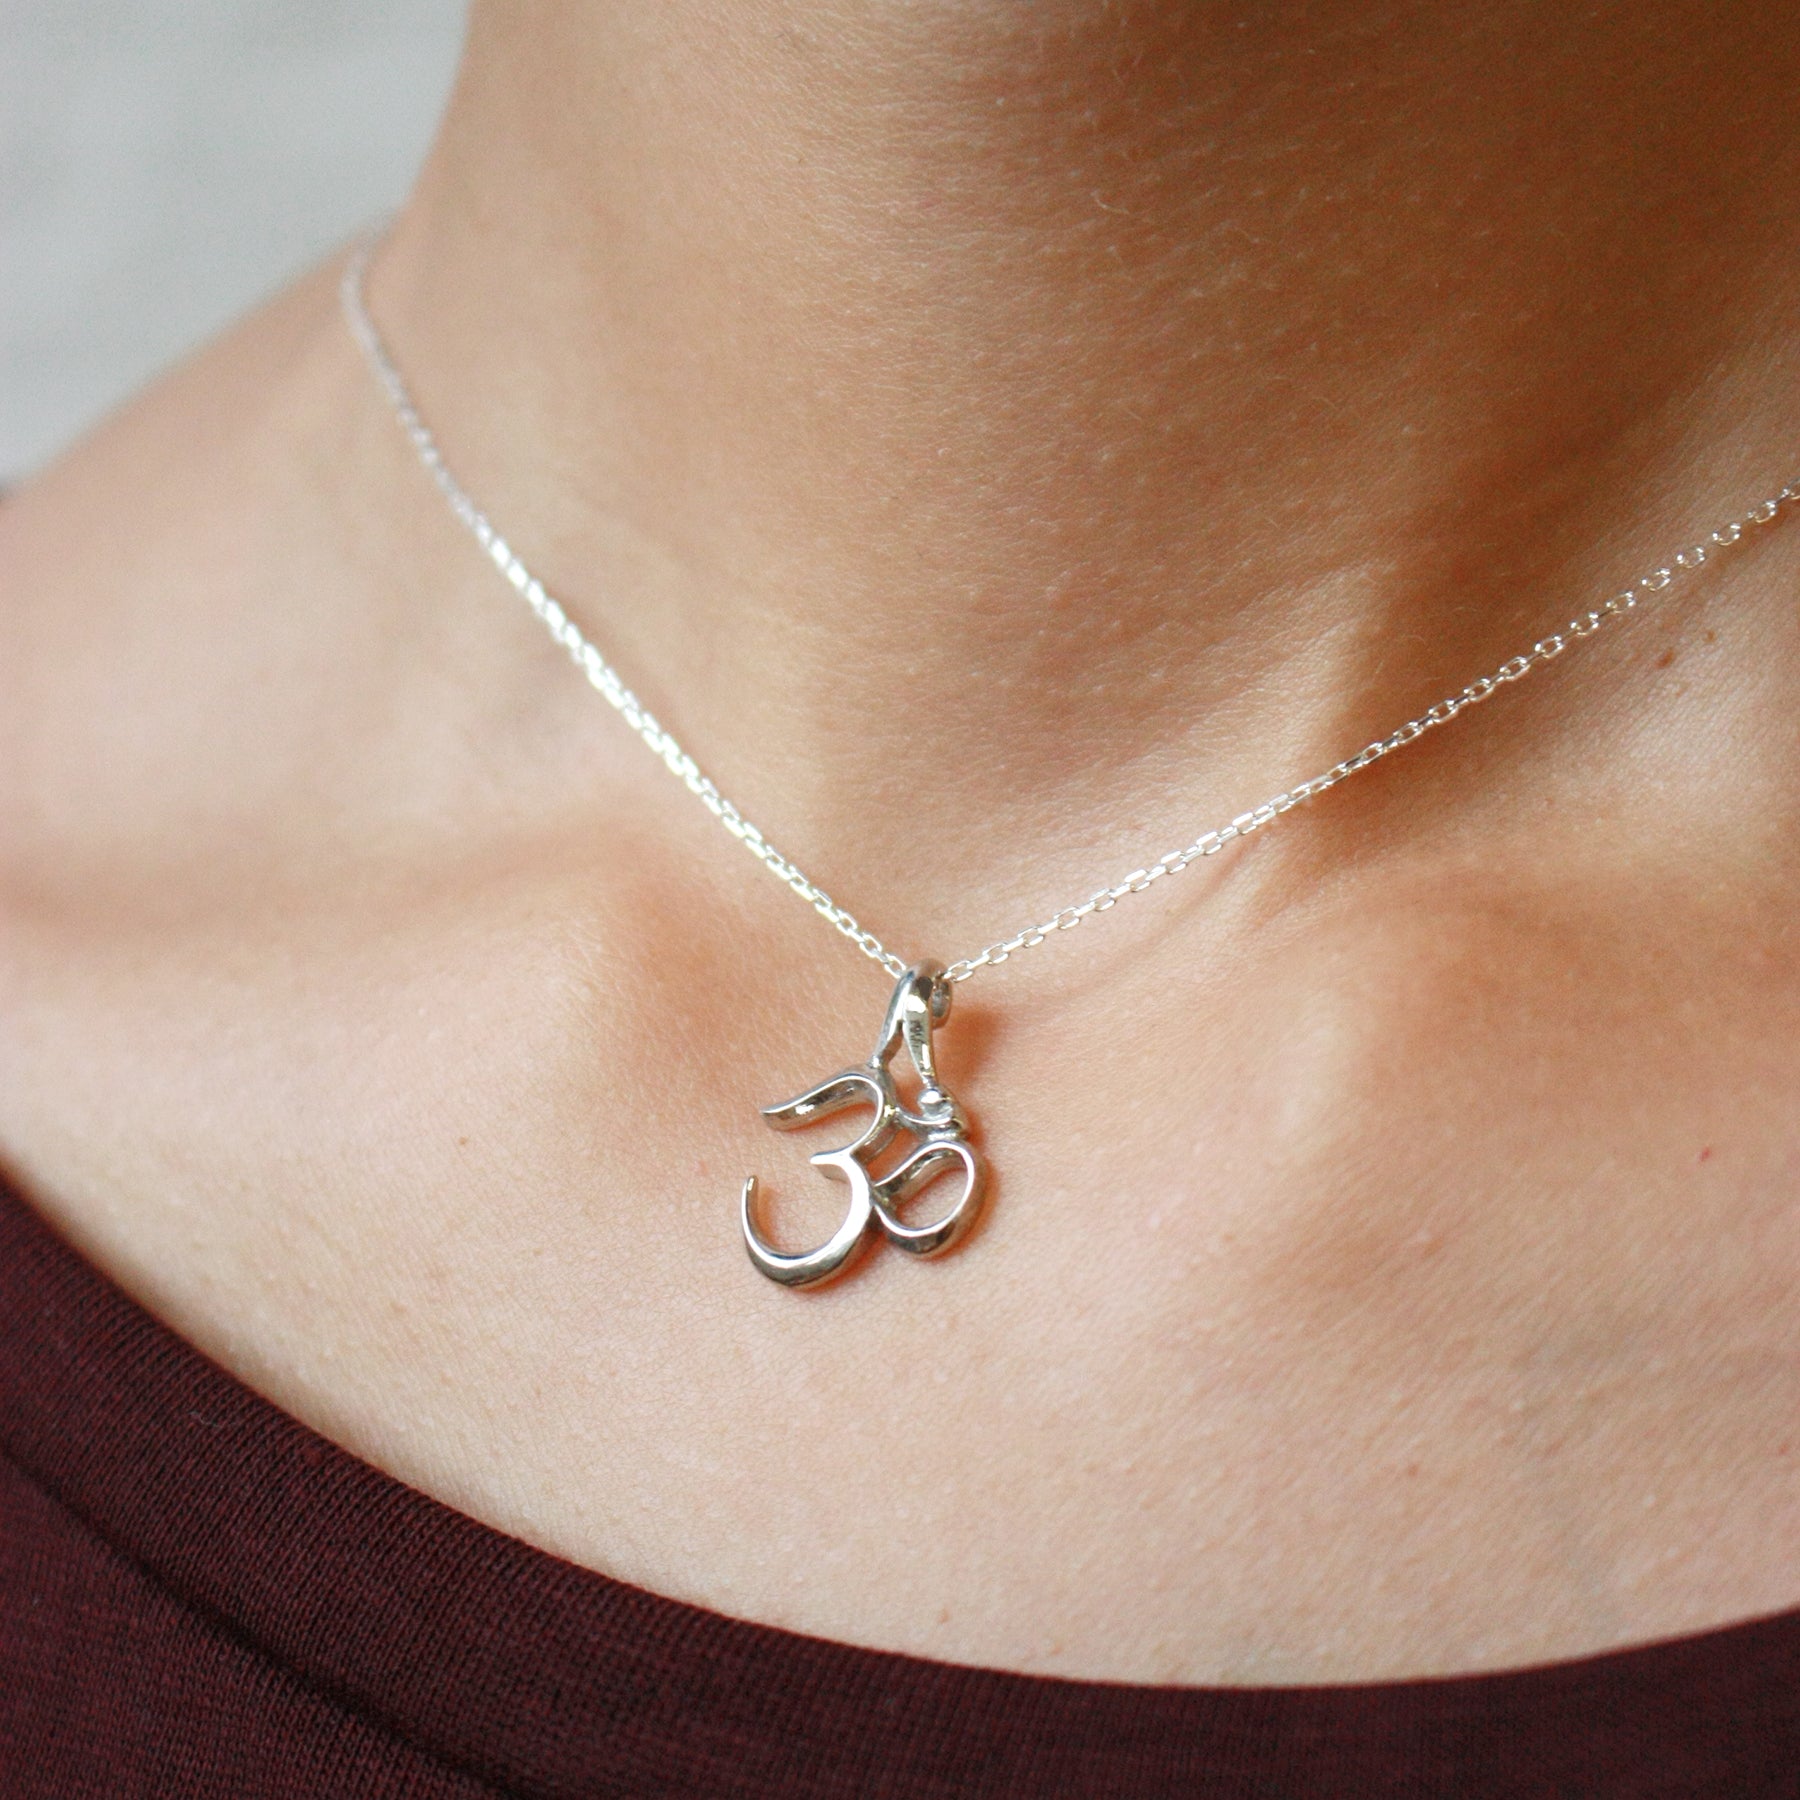 om necklace sterling silver om yoga jewelry